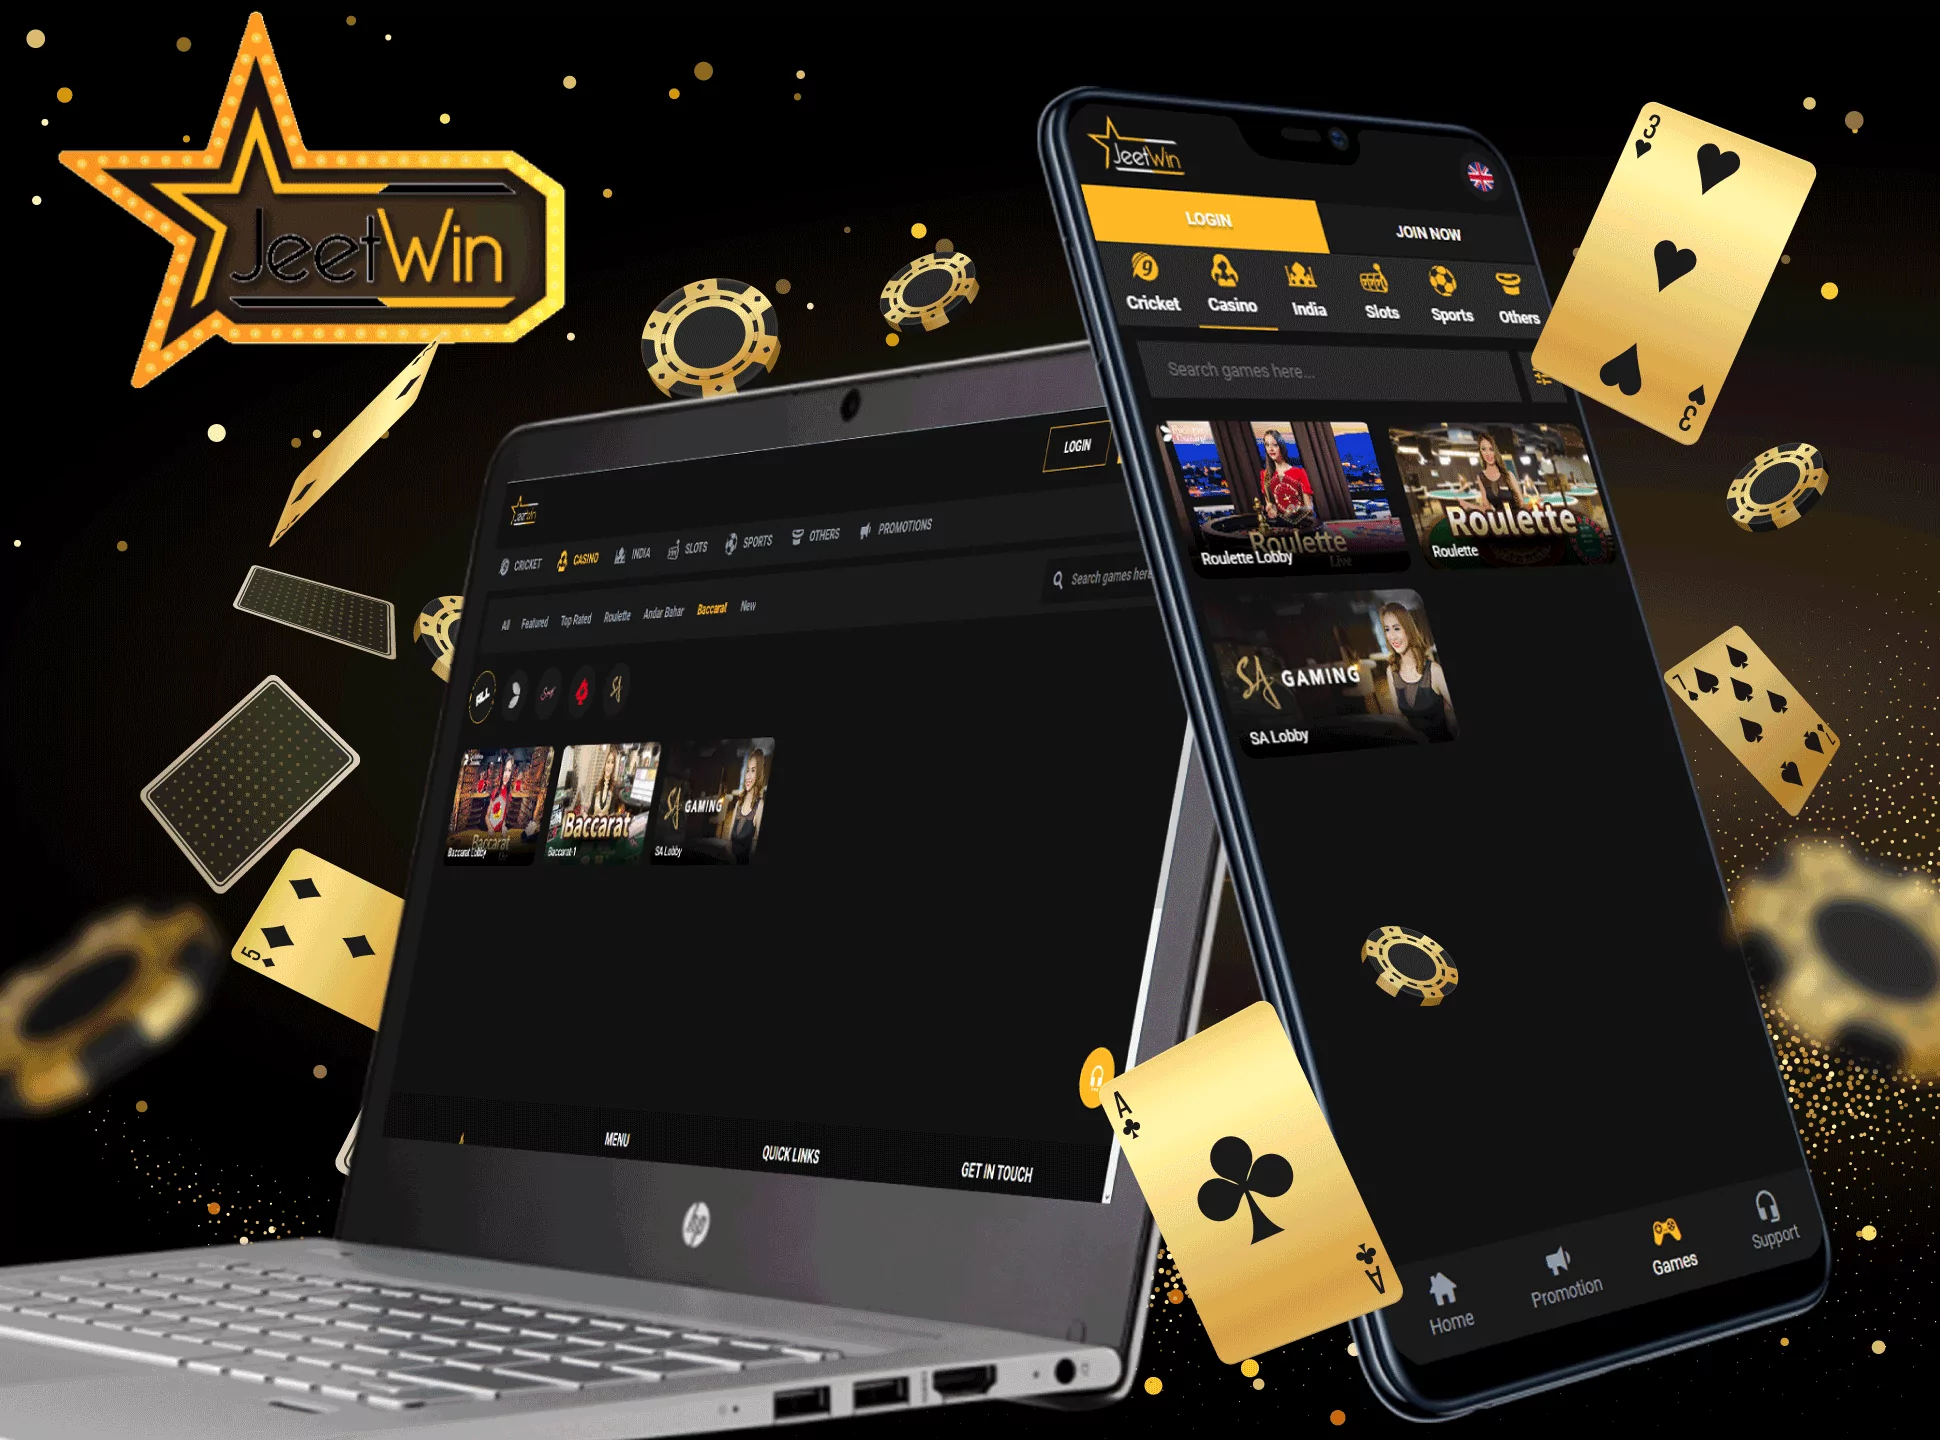 In the Jeetwin casino you will find all the most popular casino games.